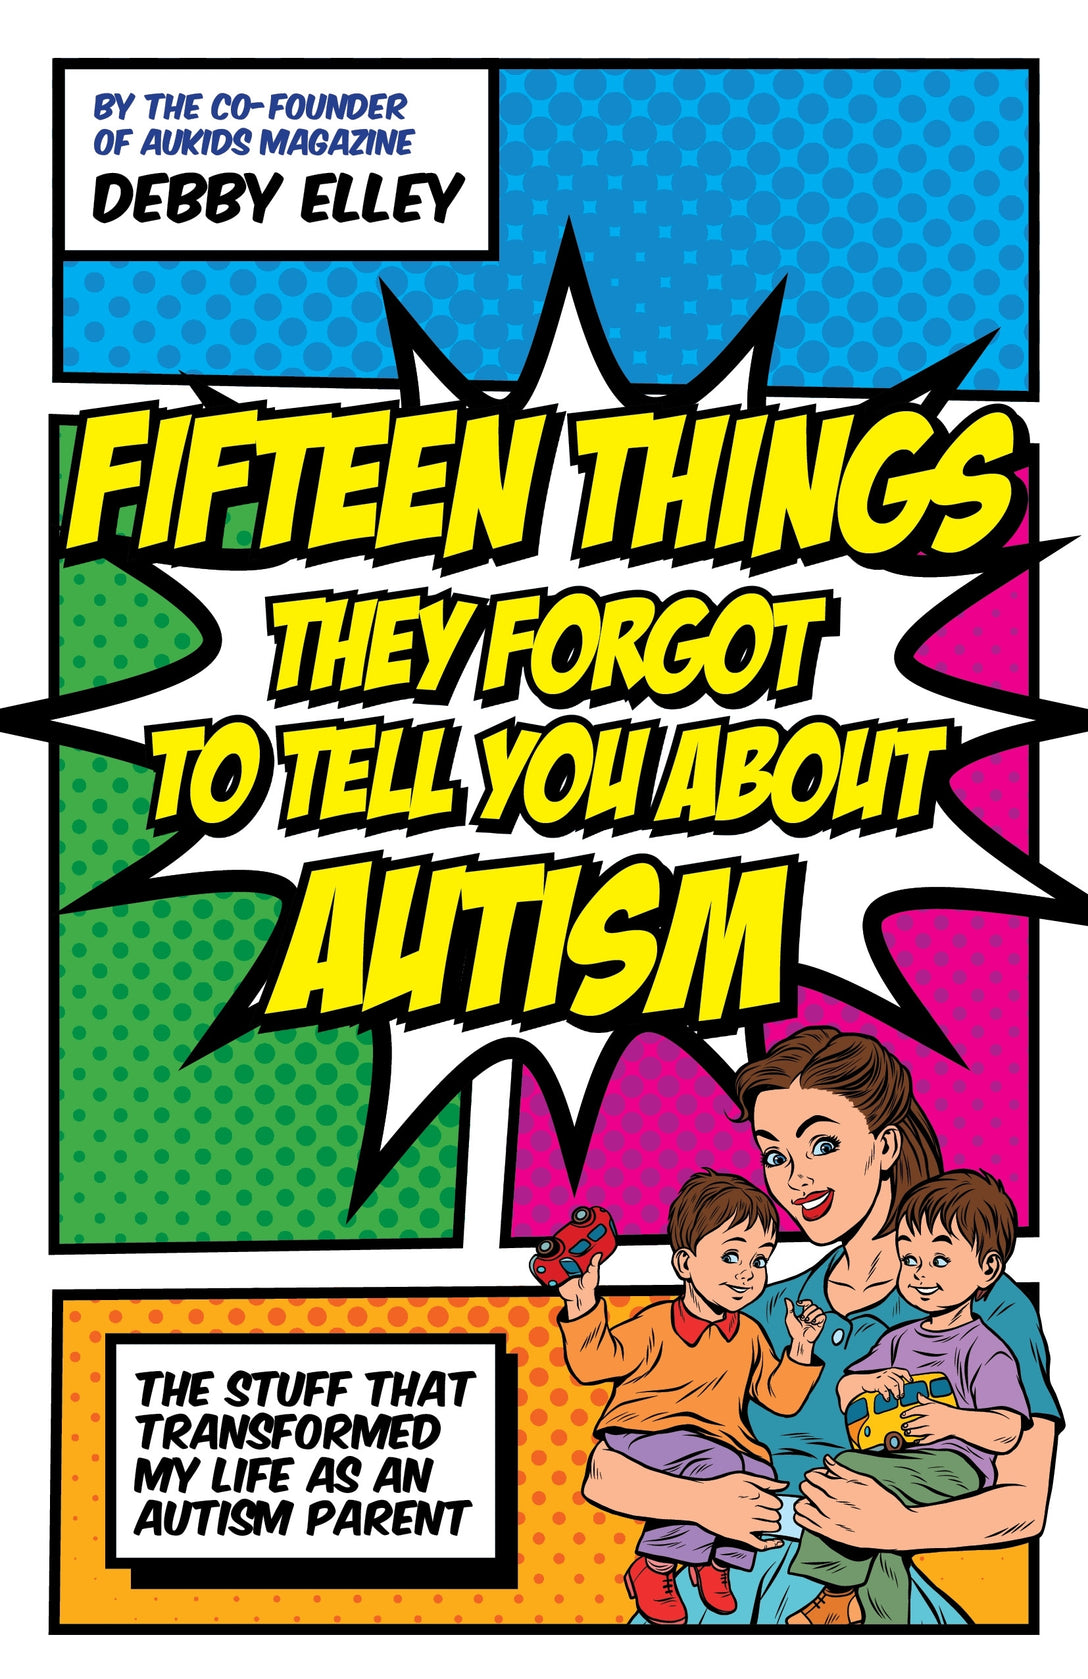 Fifteen Things They Forgot to Tell You About Autism by Debby Elley